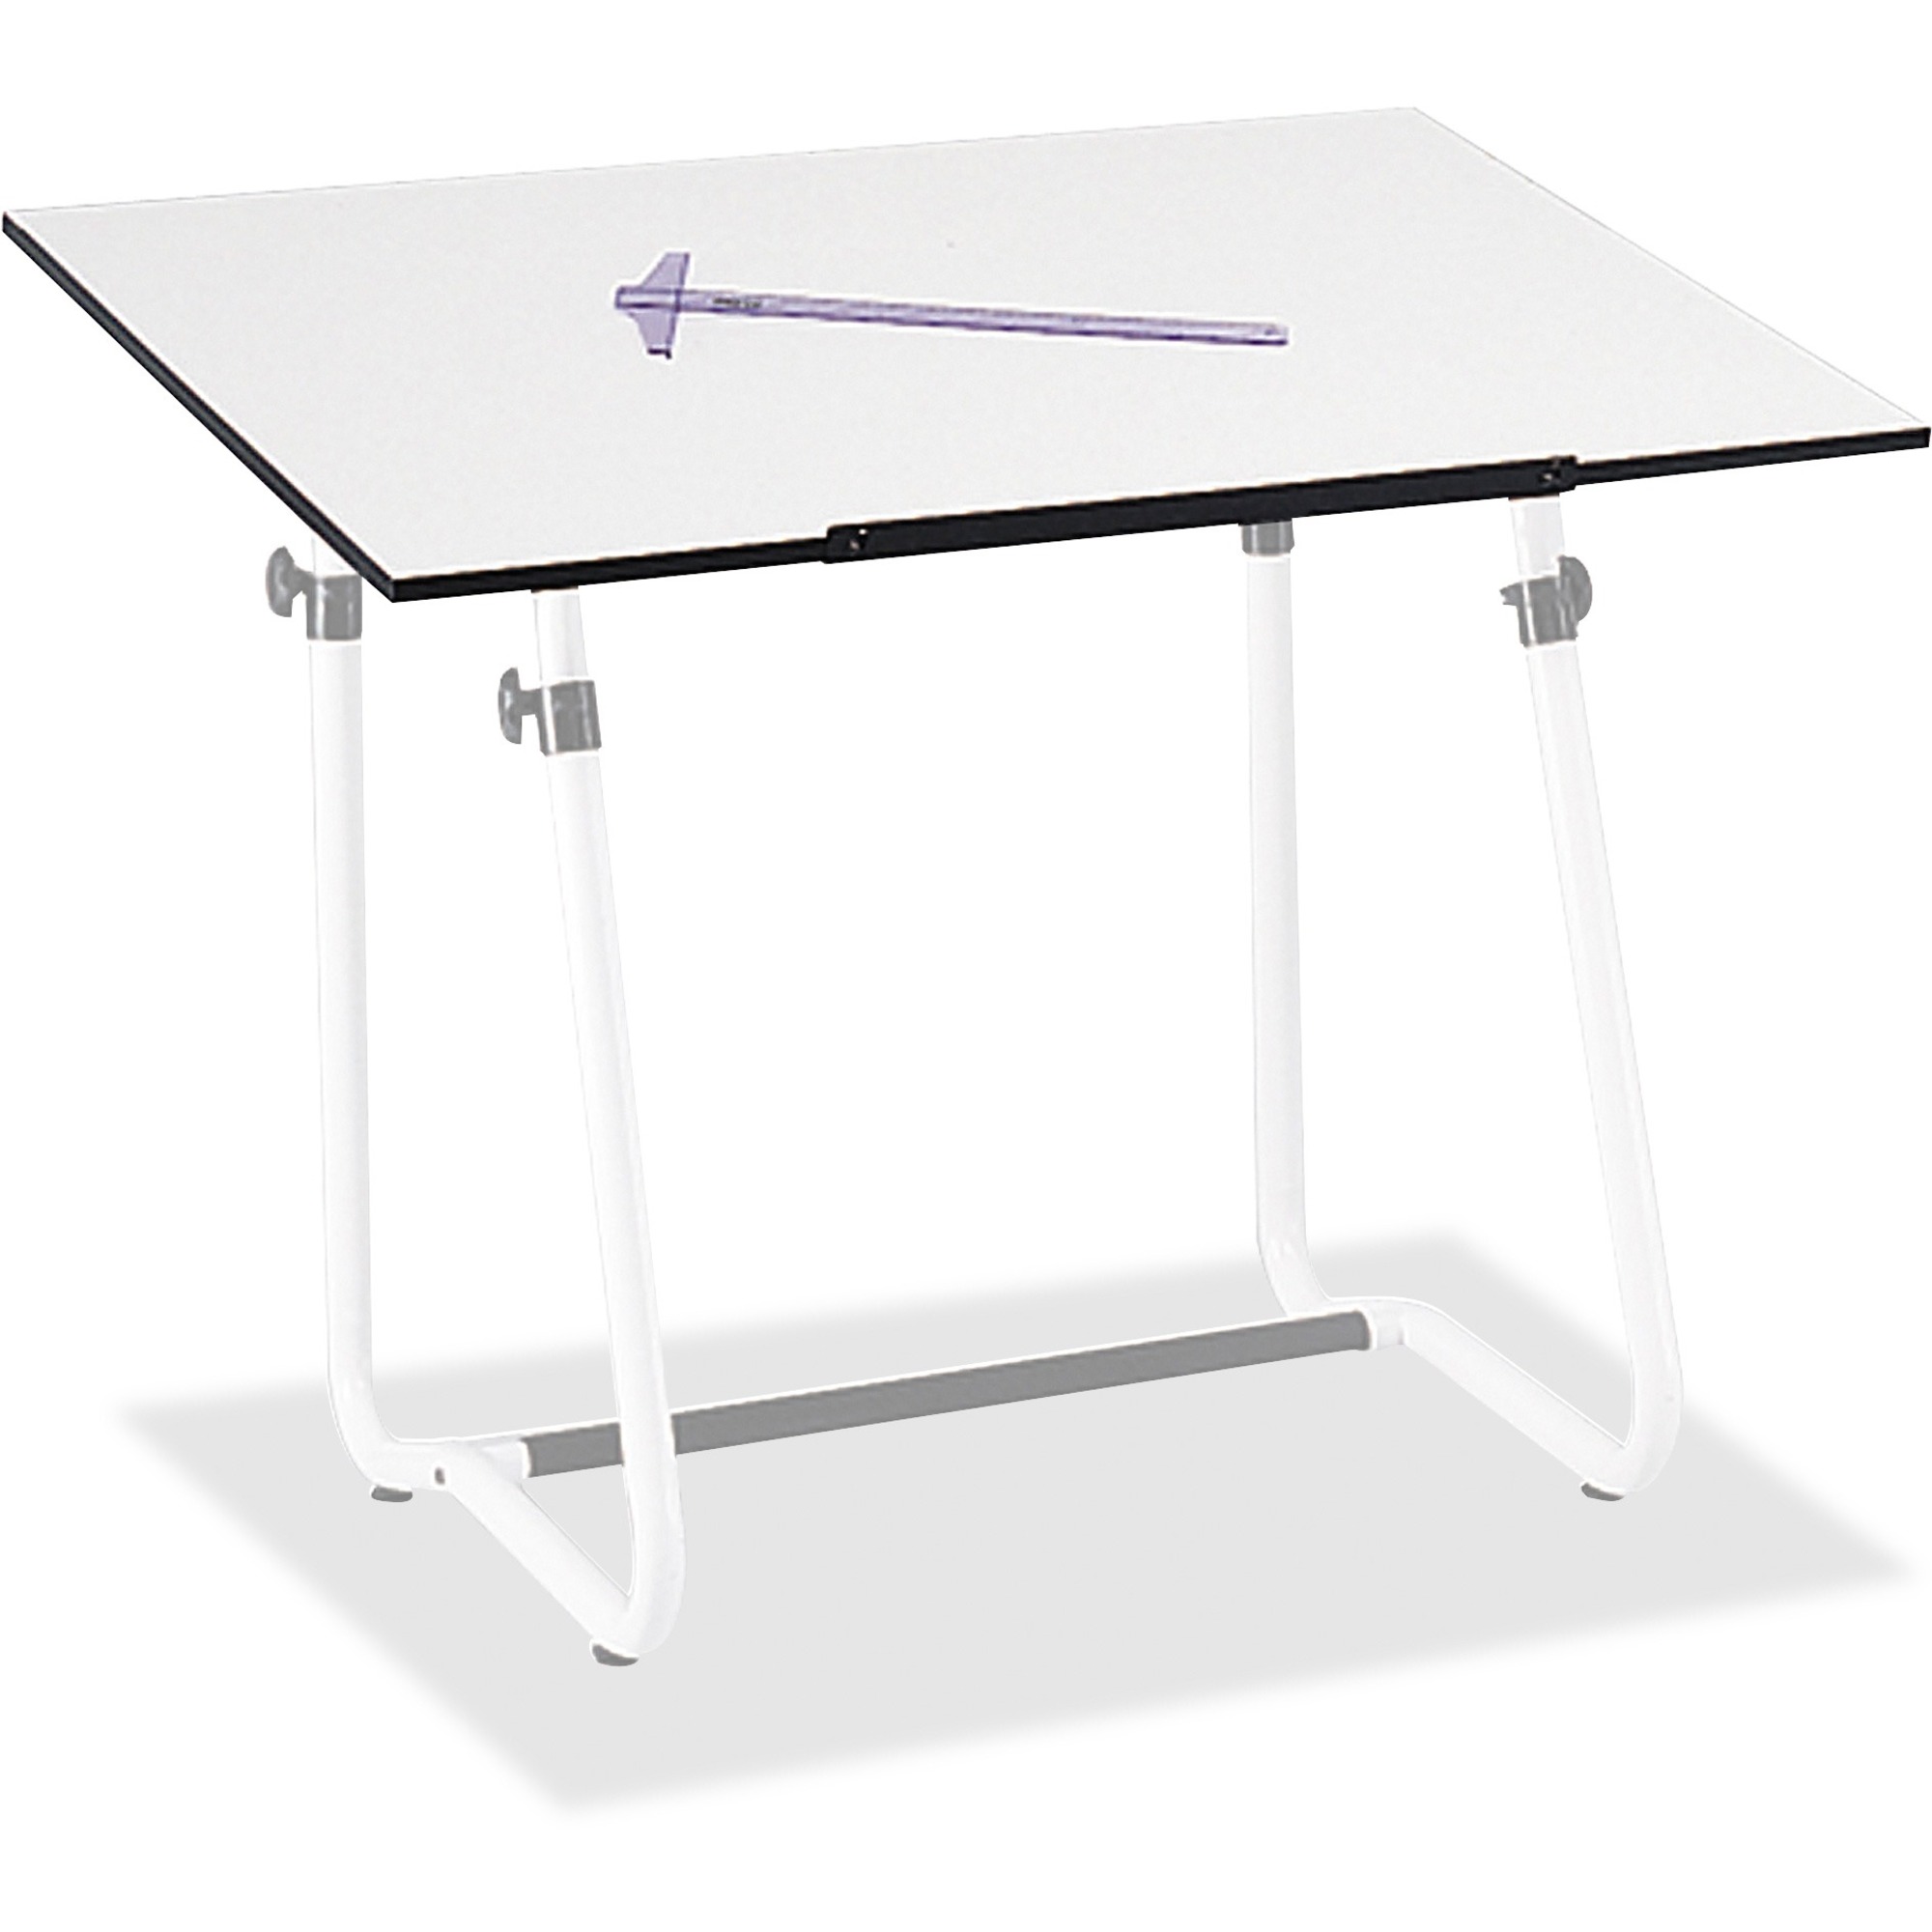 Safco Vista Drawing Table Base - Madill - The Office Company